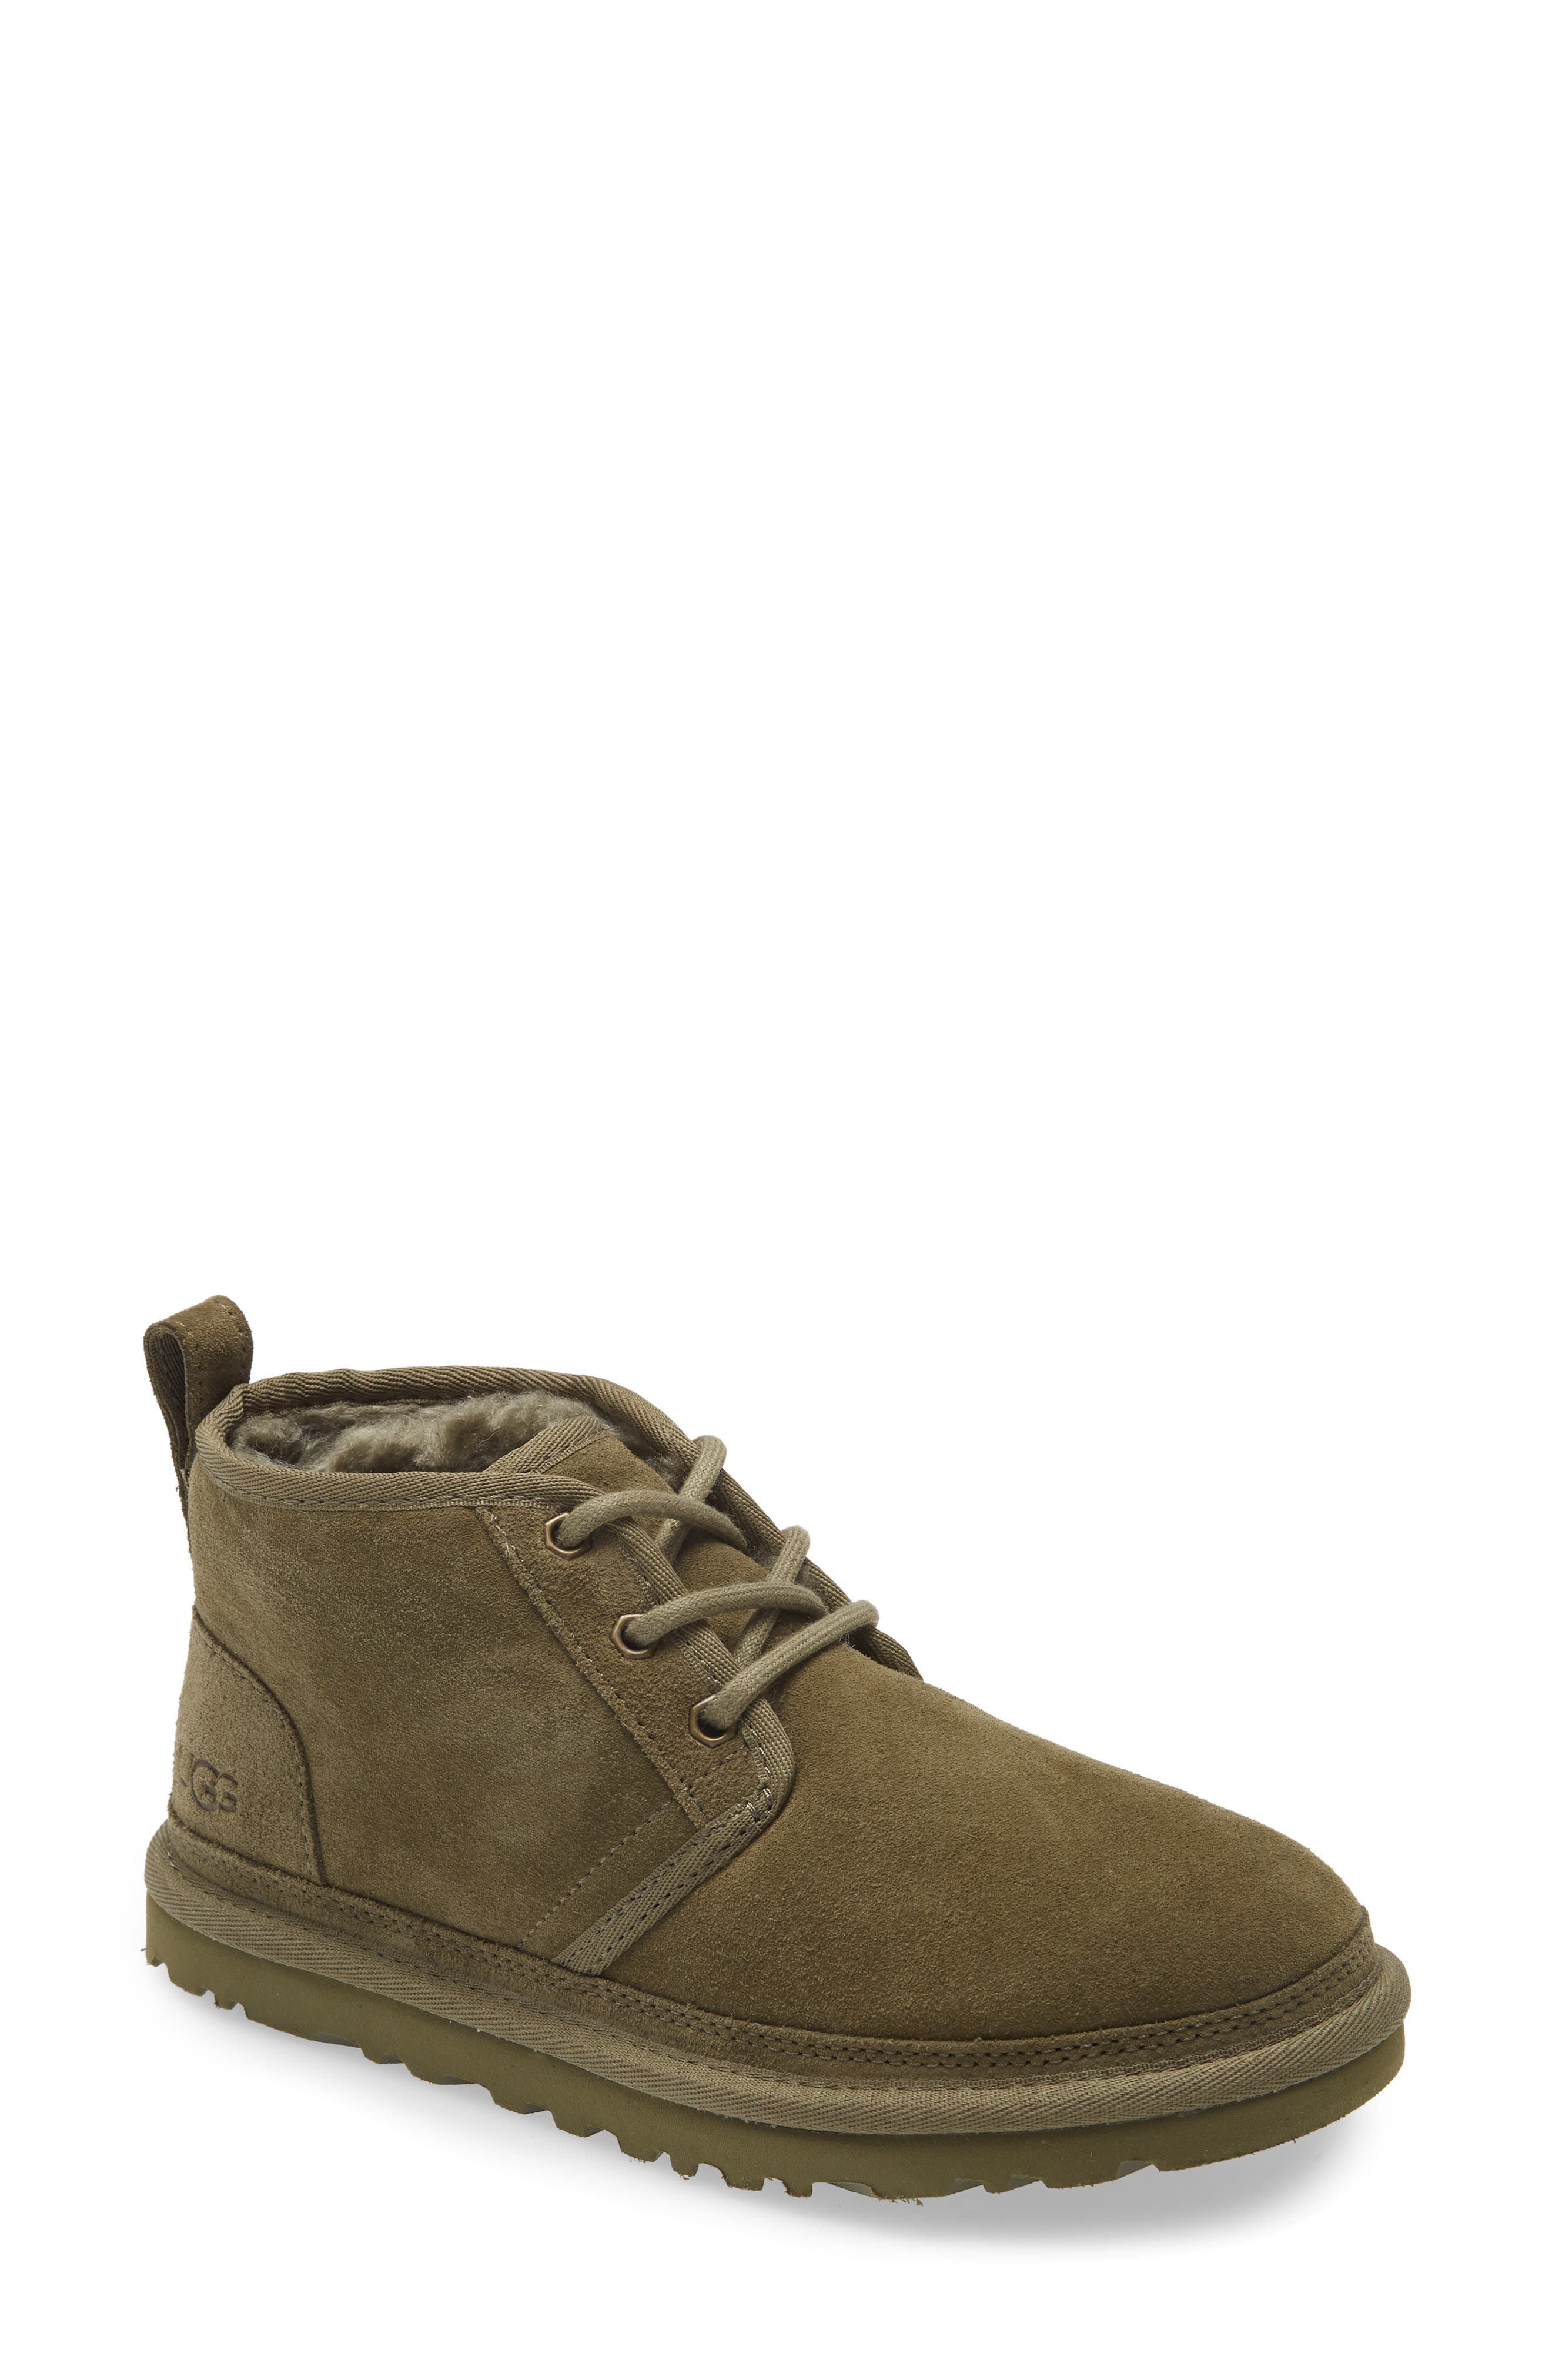 green ugg boots women's shoes